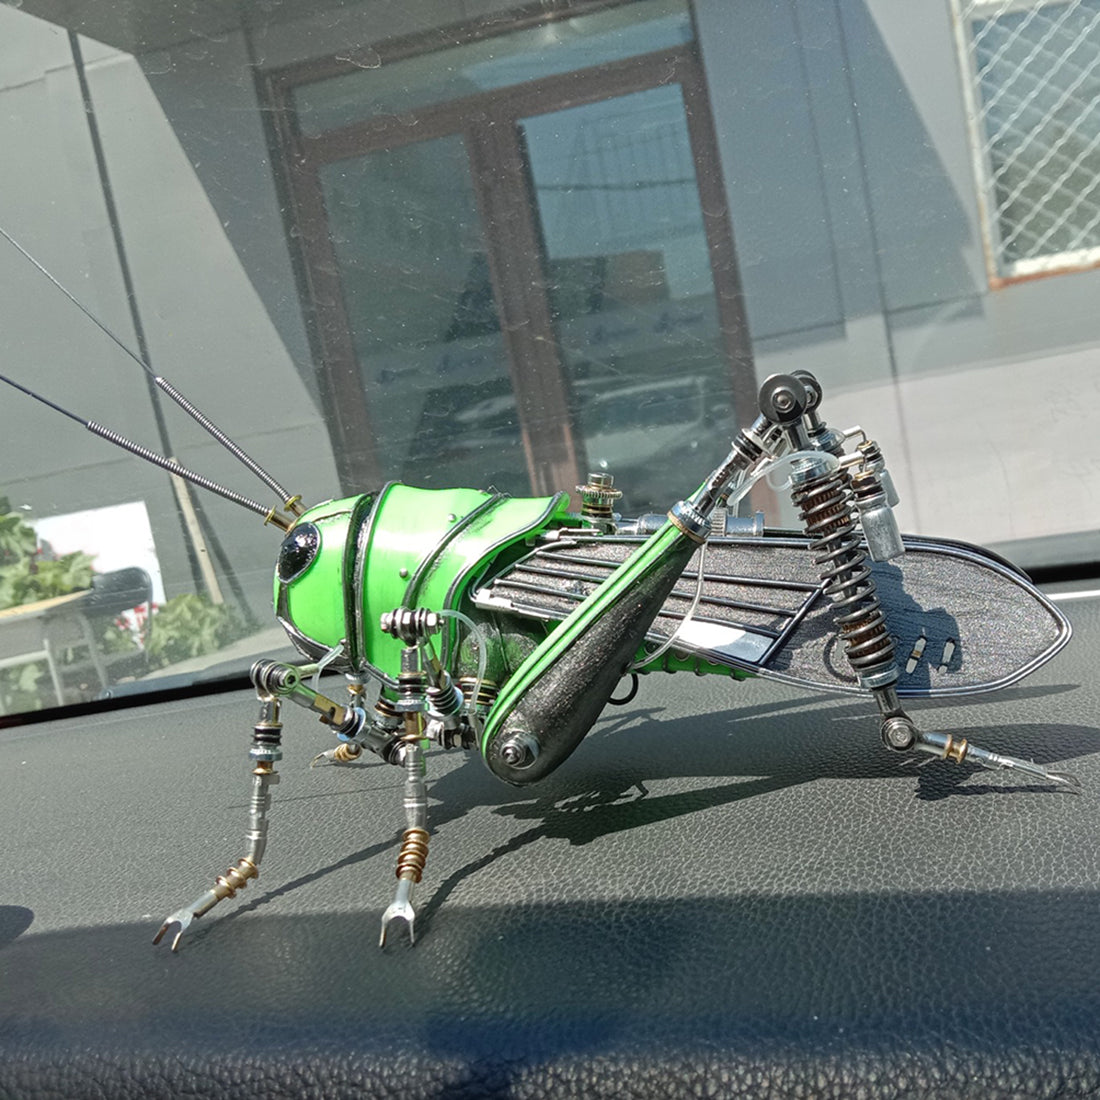 Steampunk Mechanical Metal Green Locust Bug Insect Sculptures Puzzle Assembled Model Kits